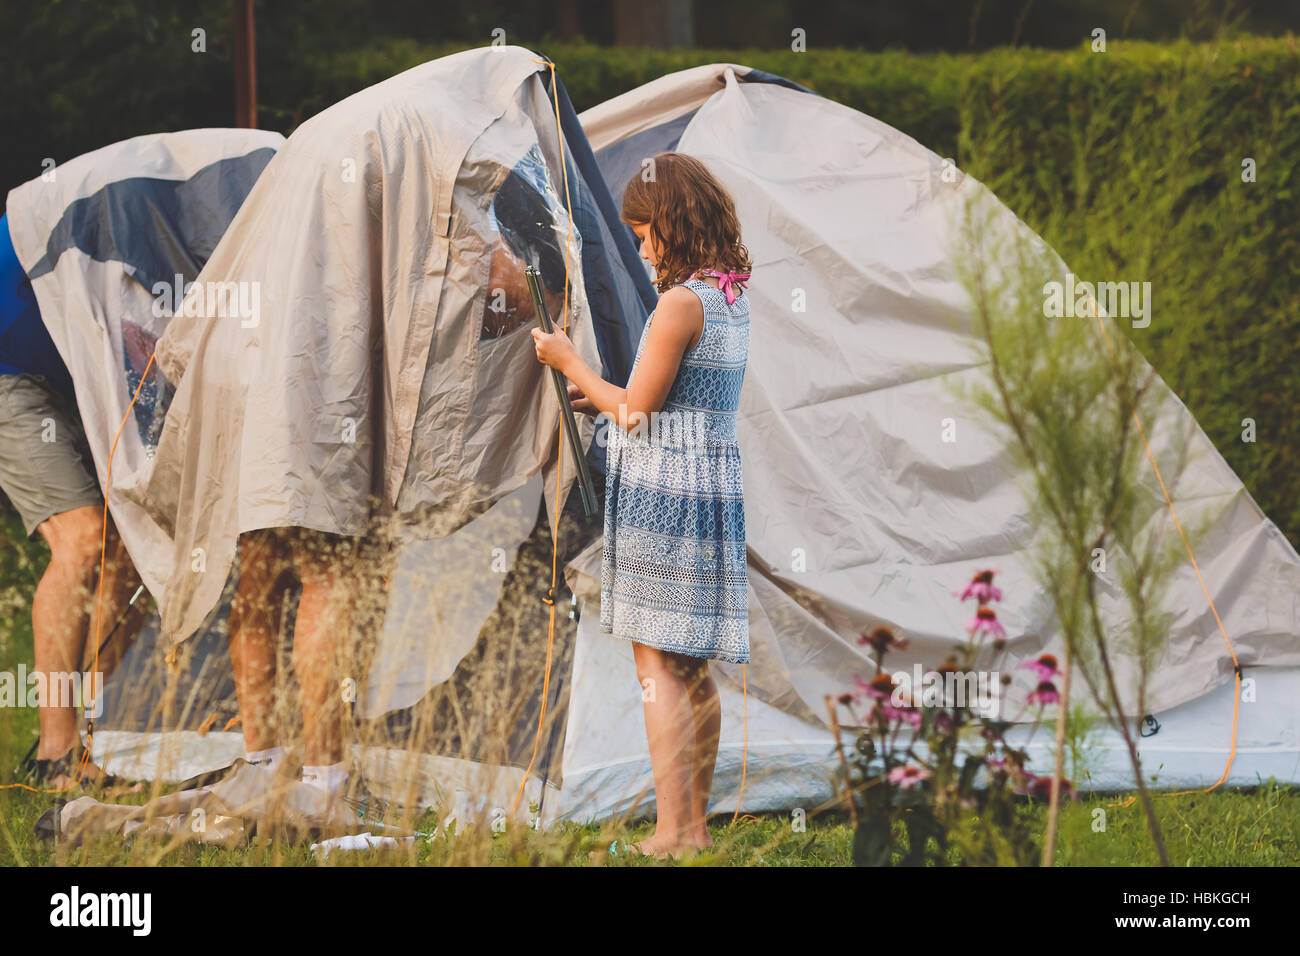 Struggling to set up a tent Stock Photo